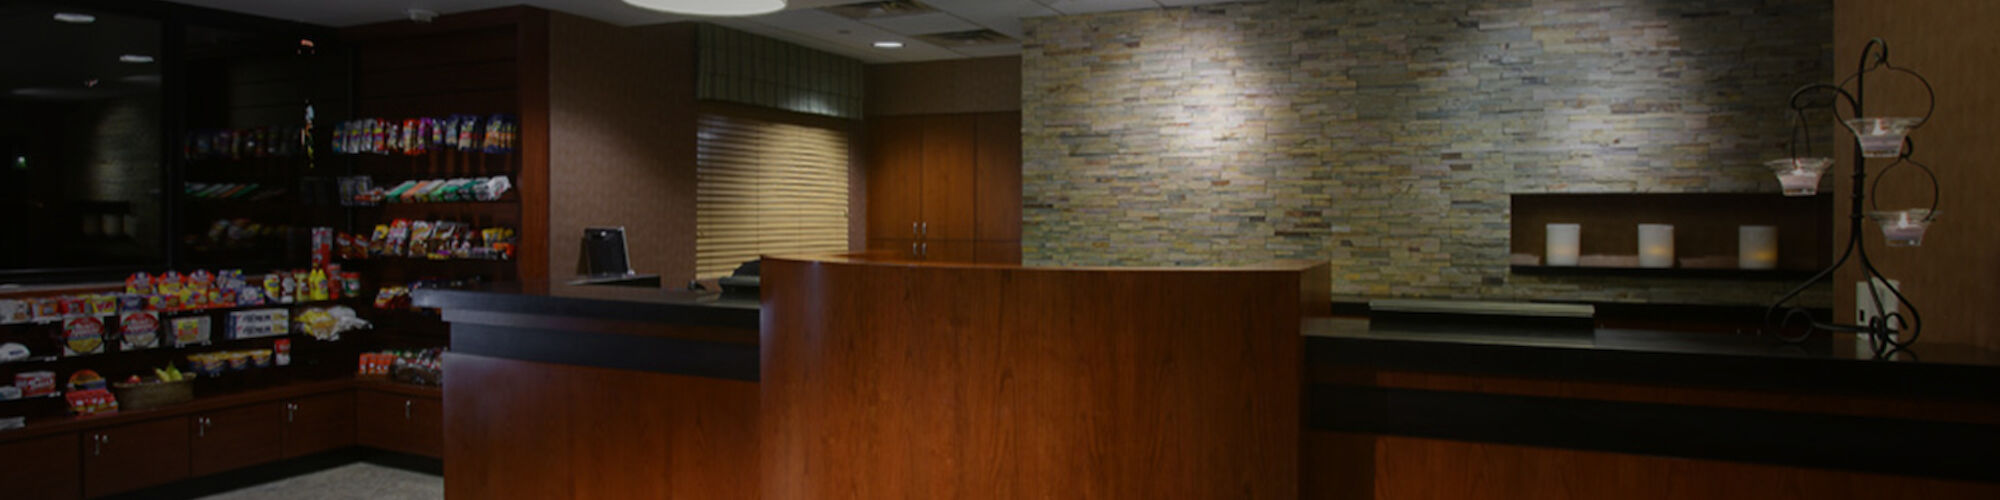 The image shows a reception desk area with wooden finishes and stone walls, featuring modern lighting and a snack display shelf to the left.